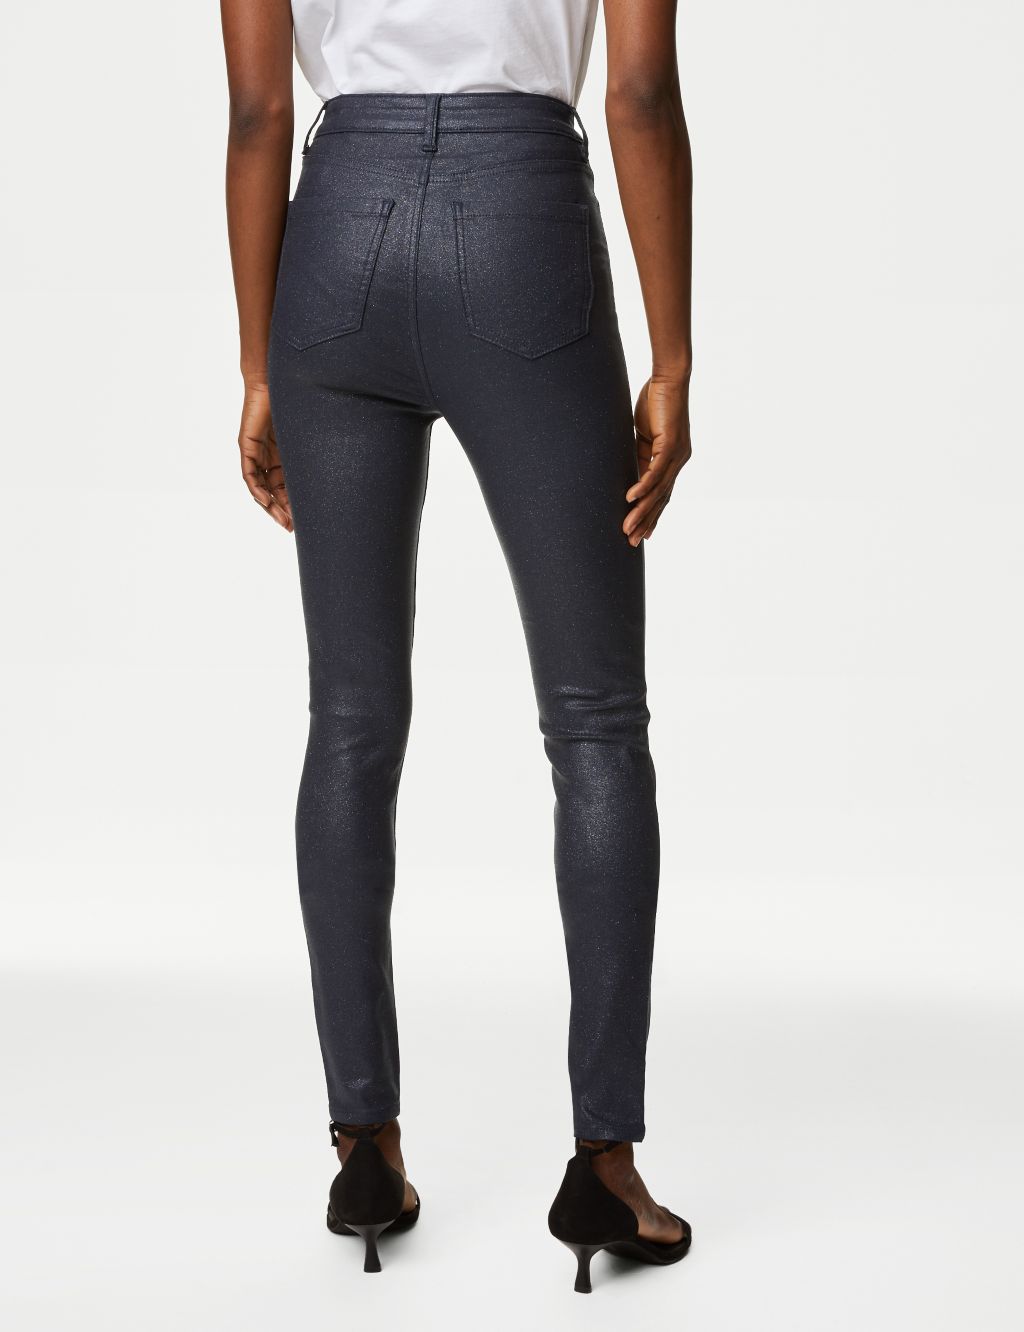 Ivy High Waisted Shimmer Skinny Jeans image 5